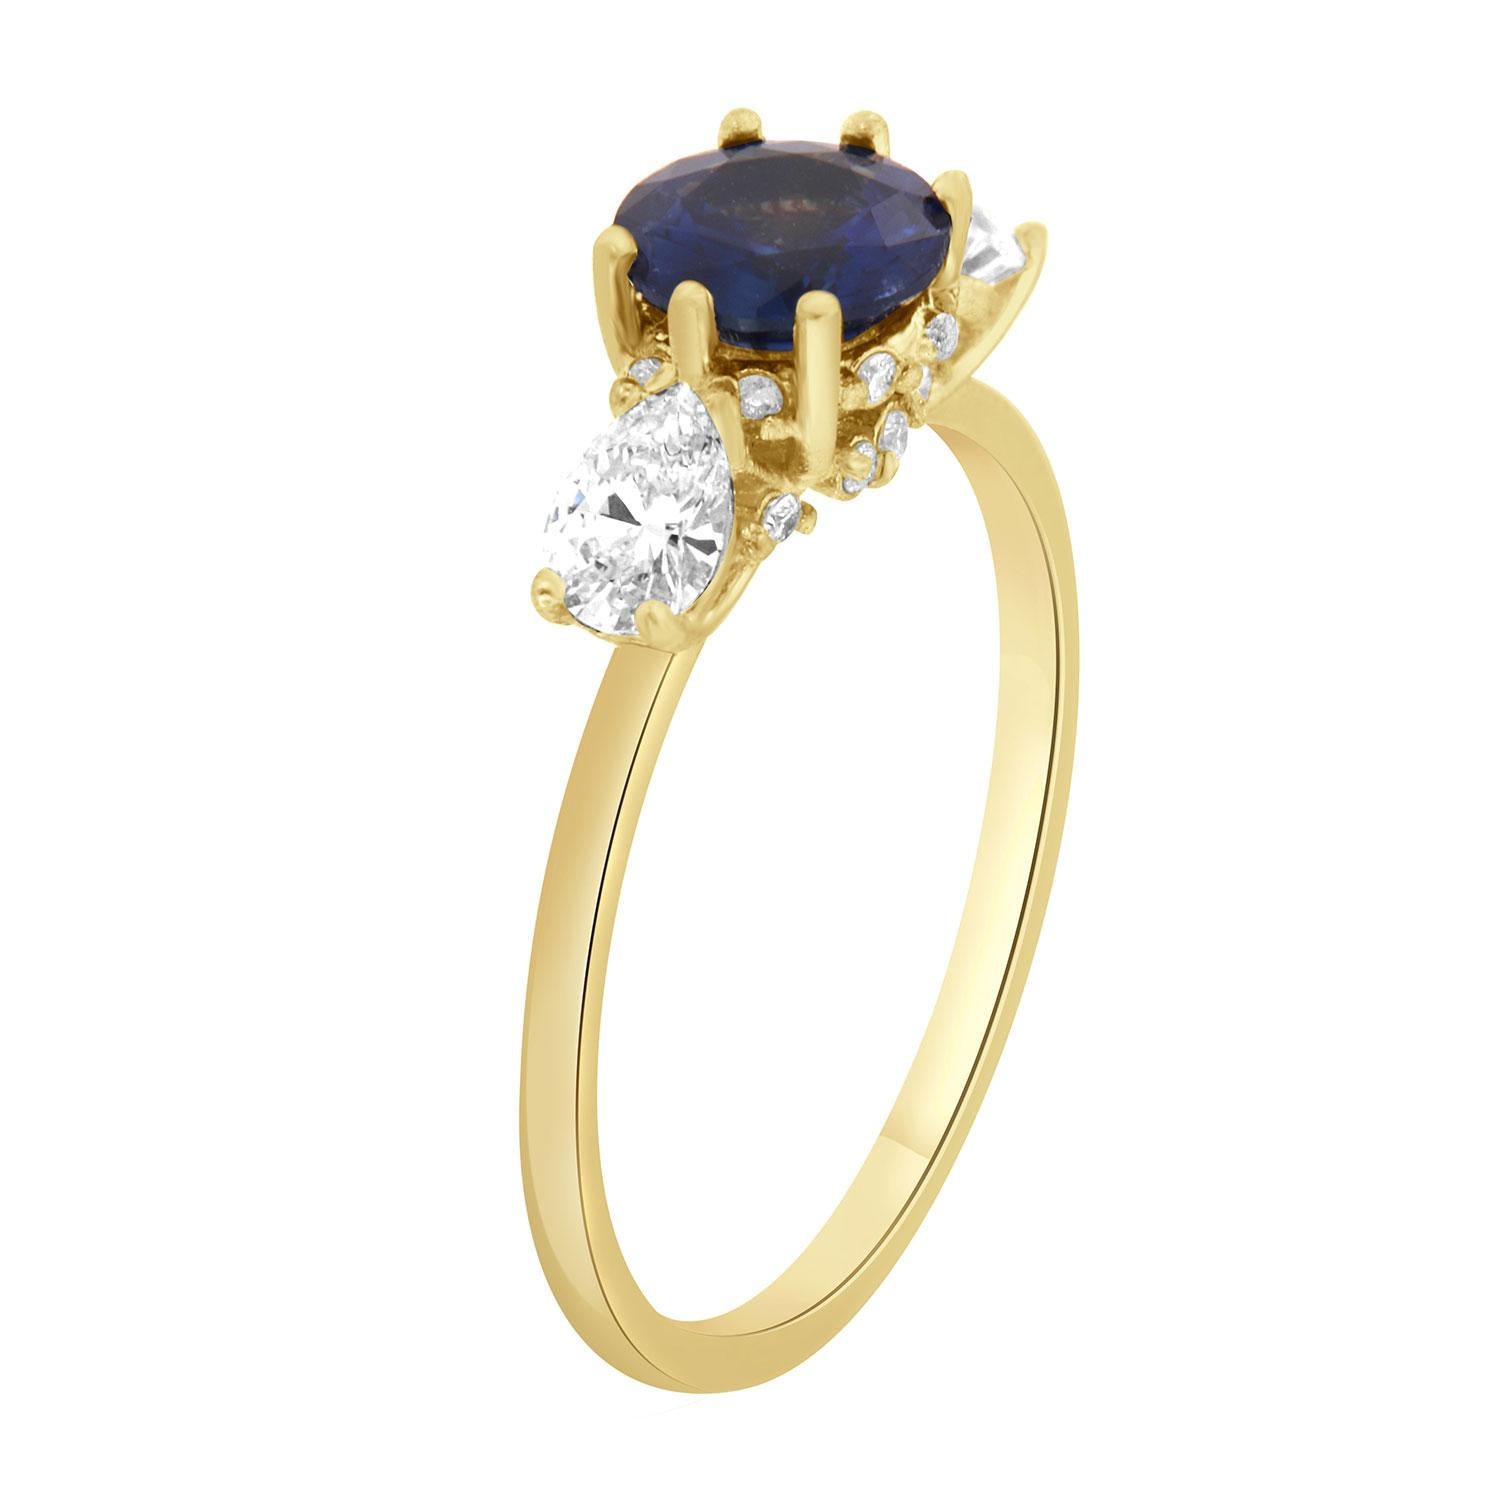 This petite ring is from our Vale collection is impressive in its Earthy & Organic appeal. It features a 0.96-carat round natural Sri-Lankan Sapphire set in six tiny prongs and flanked by two perfectly Pear-Shape diamonds in a total weight of 0.50.